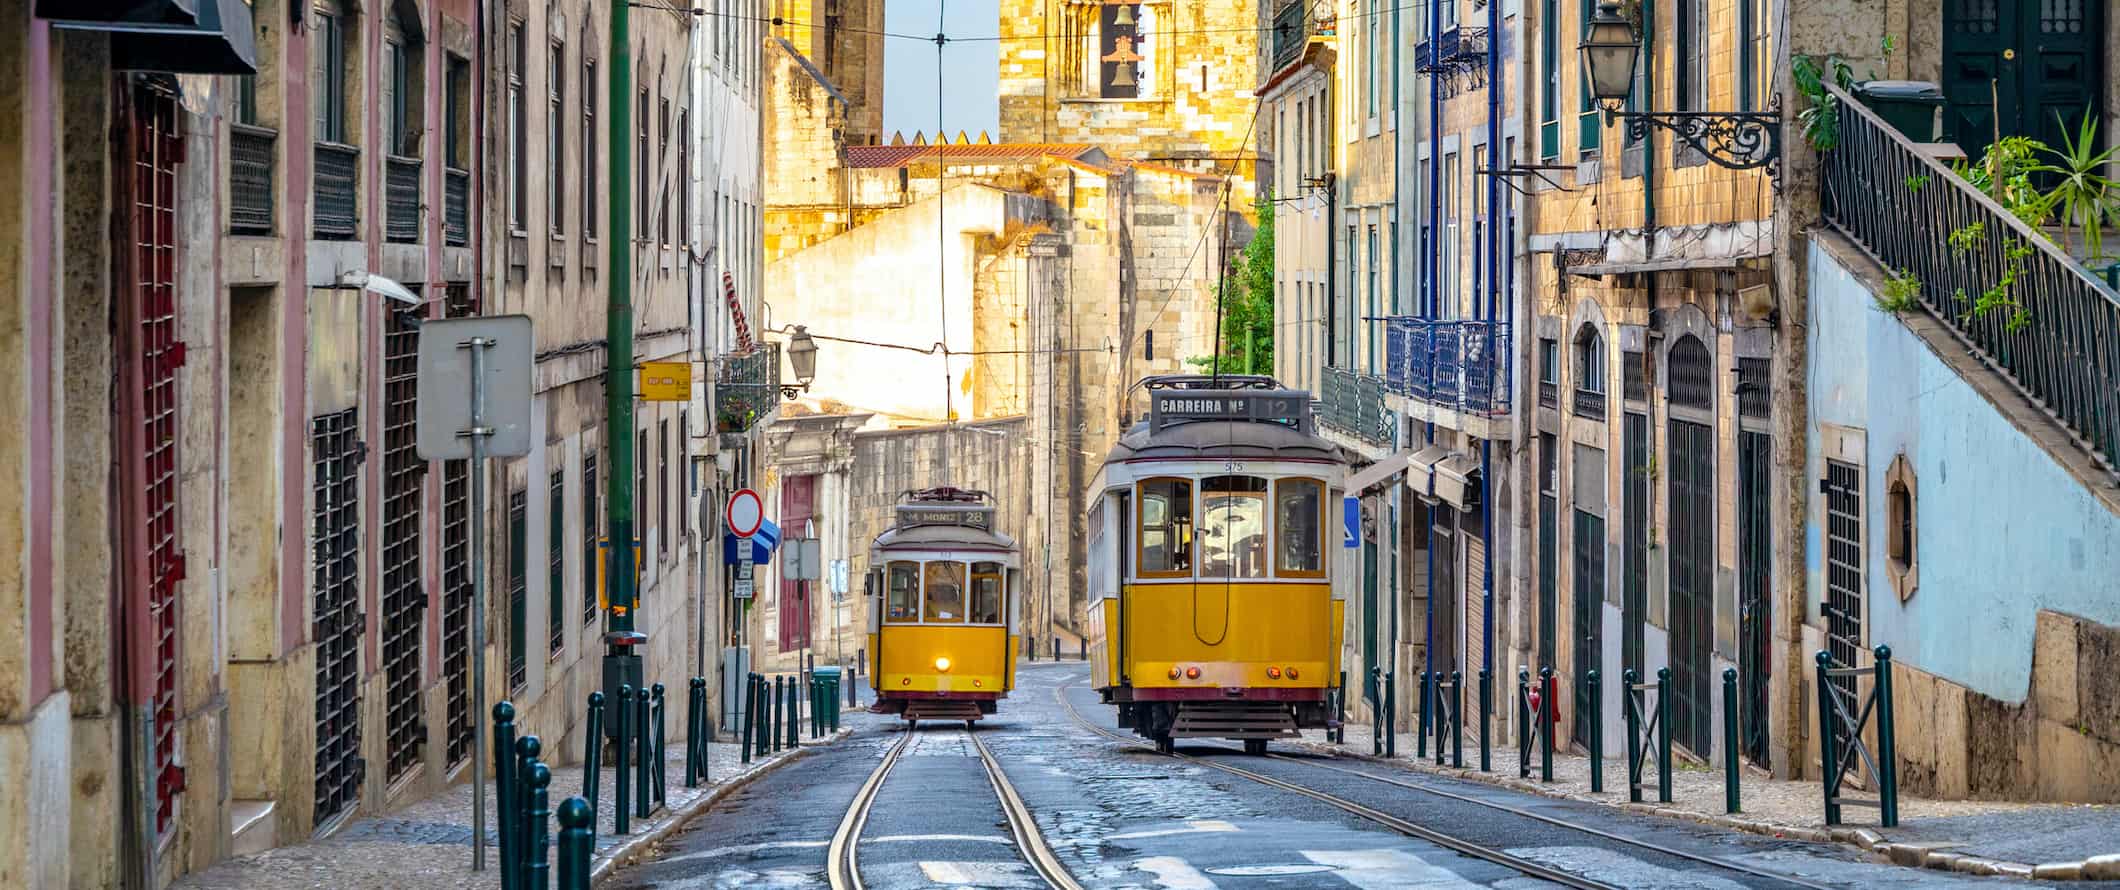 Old yellow street cars on a narrow street in the colorful city of Lisbon, Portugal